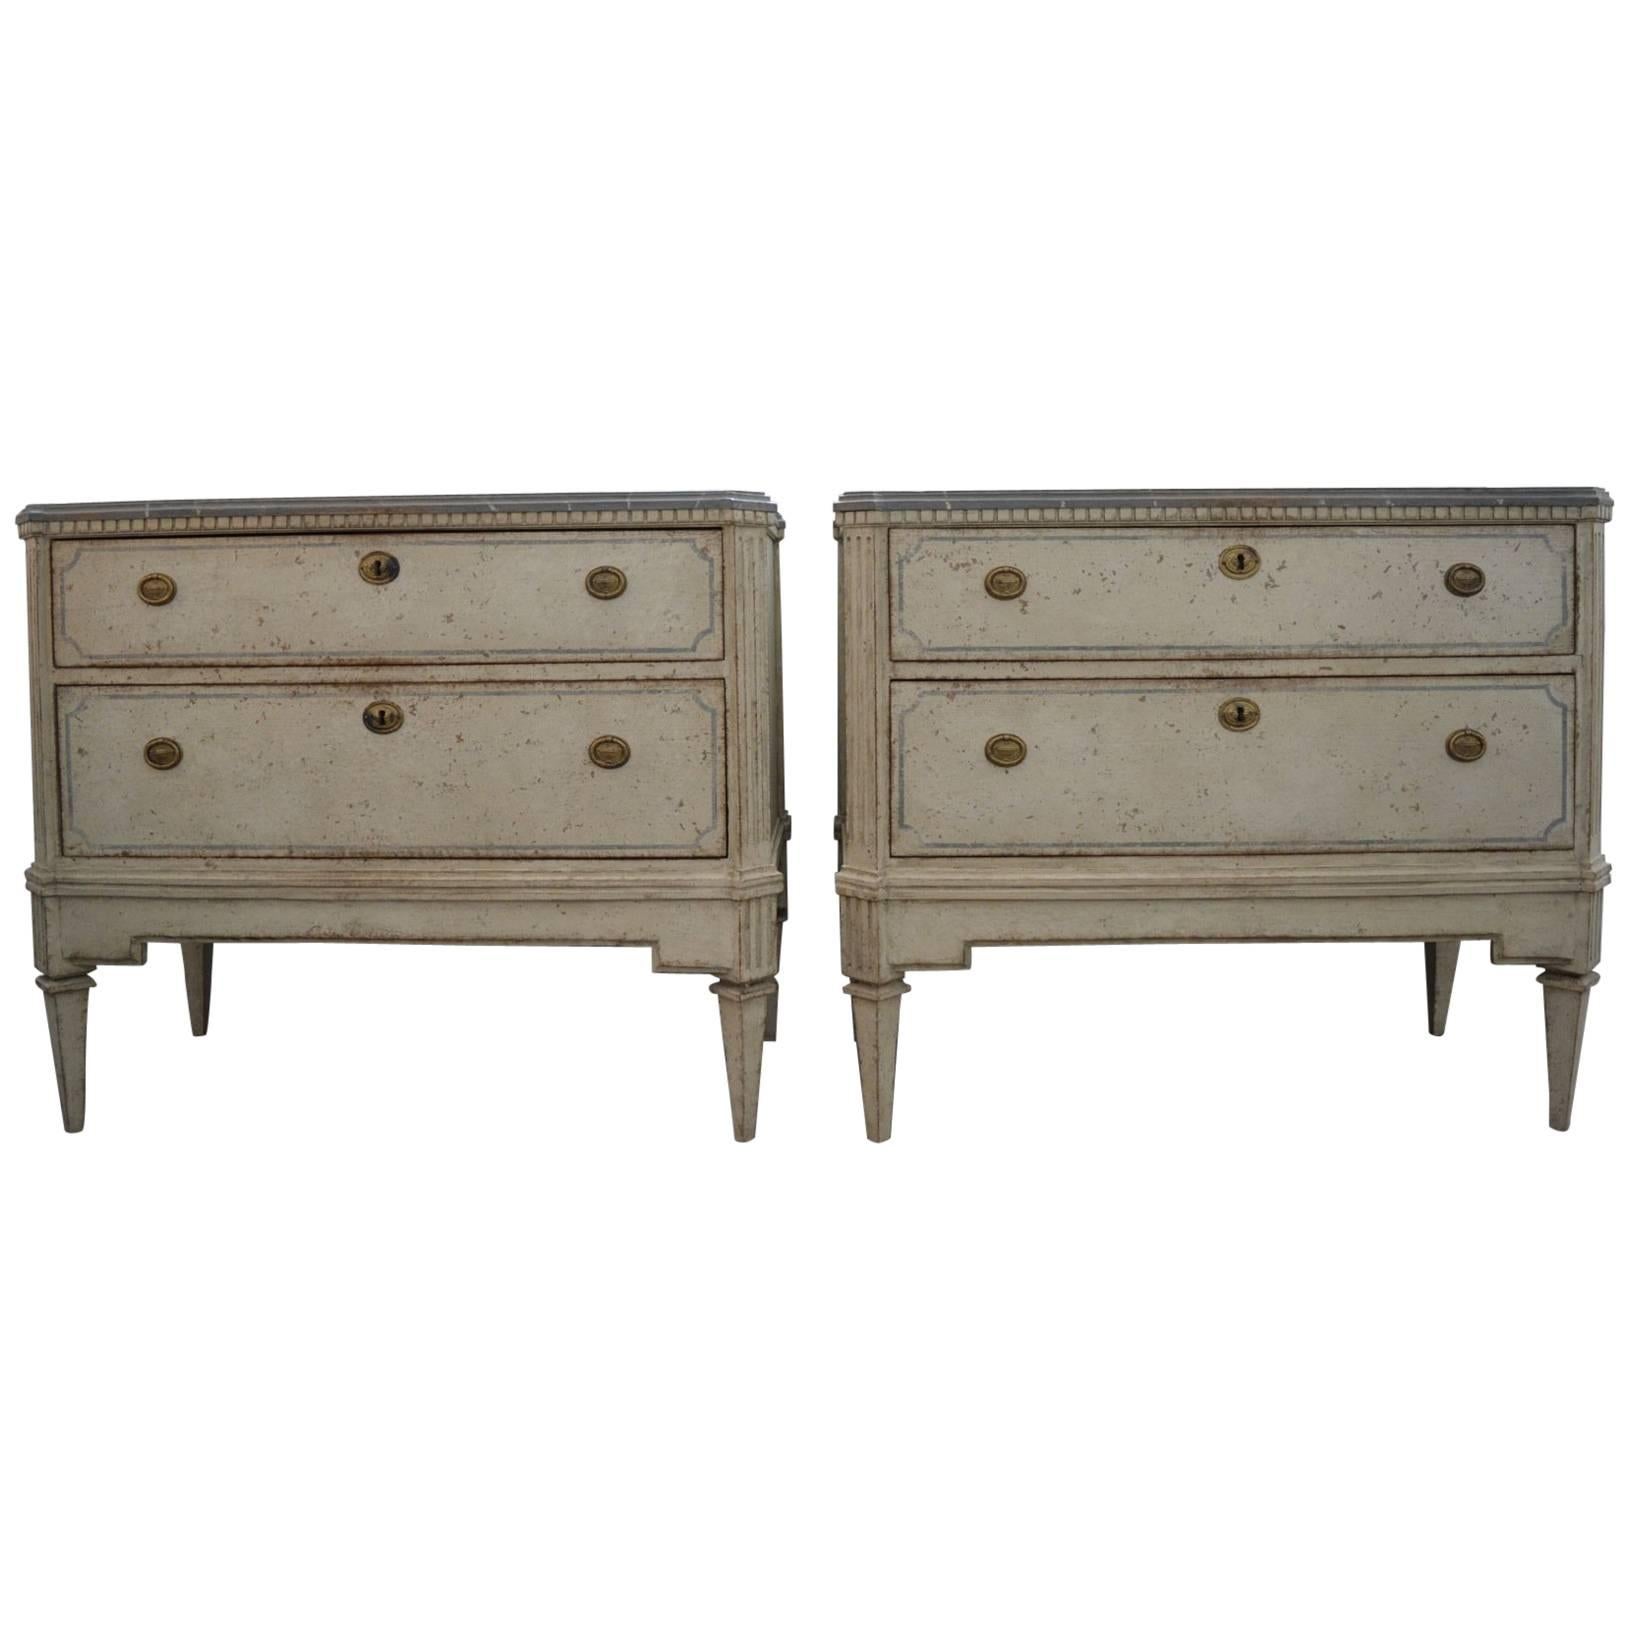 Pair of Gustavian Style Chest of Drawers, circa 1860